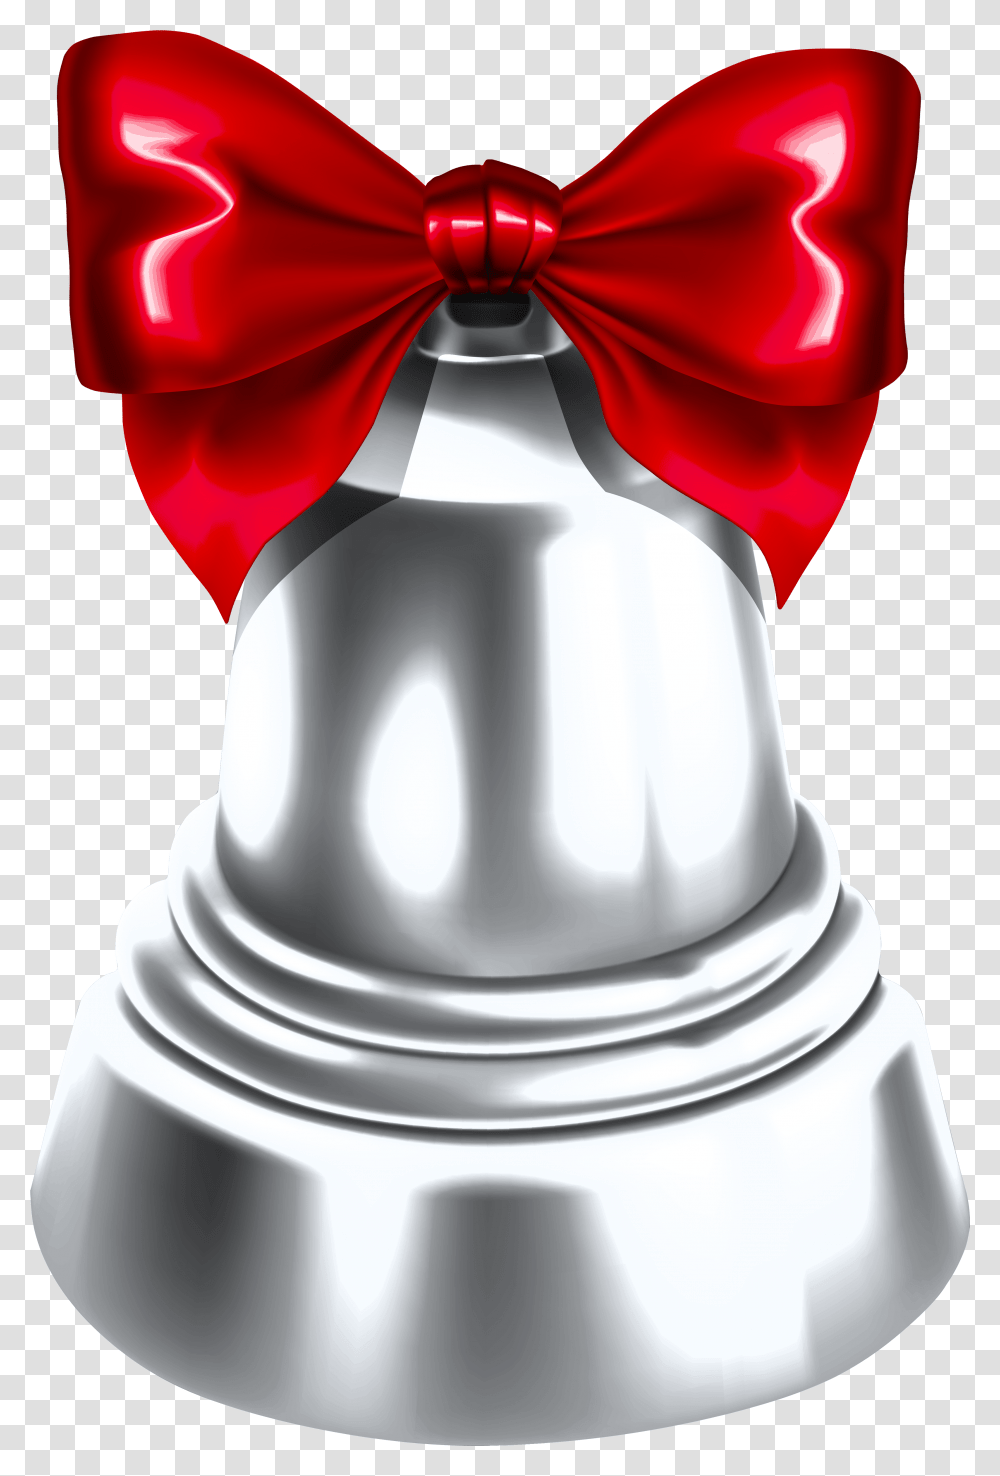 Library Of Christmas Silver Bells Black And White Silver Bells Background, Wedding Cake, Dessert, Food, Sweets Transparent Png